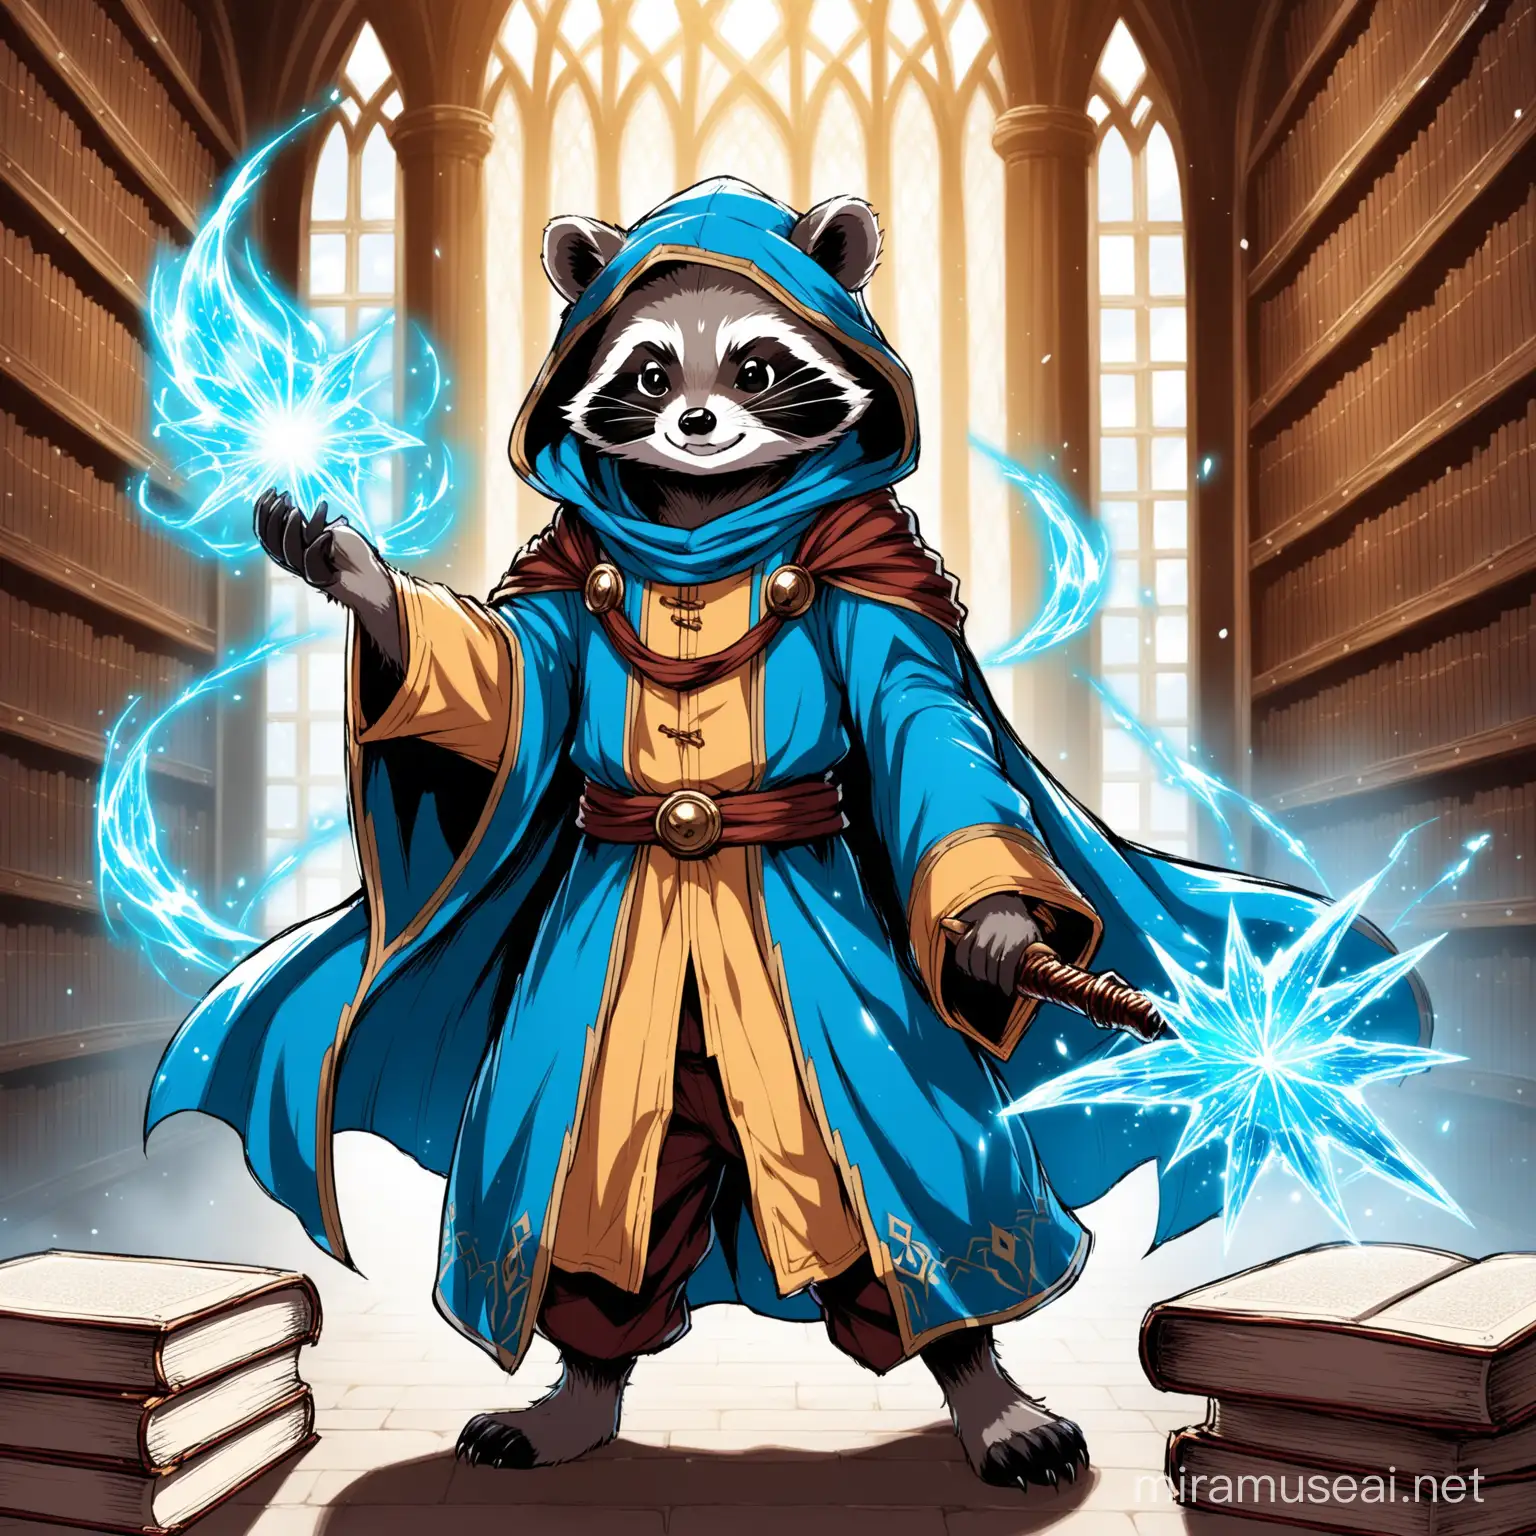 Anthropomorphic Raccoon mage, he has a defiant expression, he wears battle robes like Natsu from Fairy tail, he does not cover his head and does not wear a hood, his clothes are black and dark blue, standing on a book in a grand library, he is charging a ice spell.